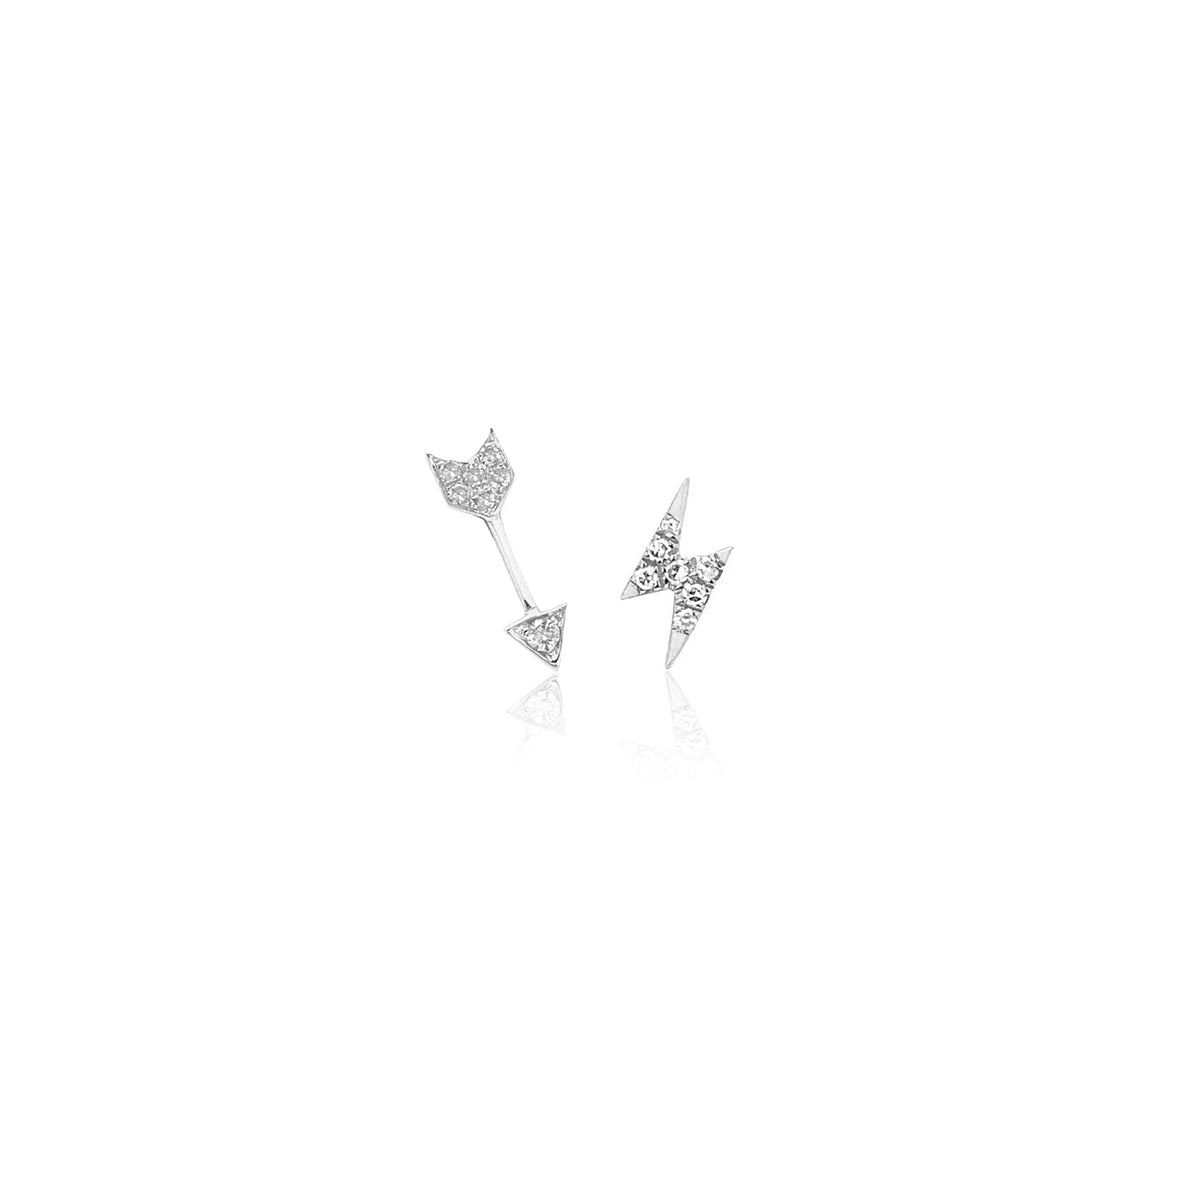 The Storm Set in 14k white gold with 1 lightening bolt earring and 1 arrow earring